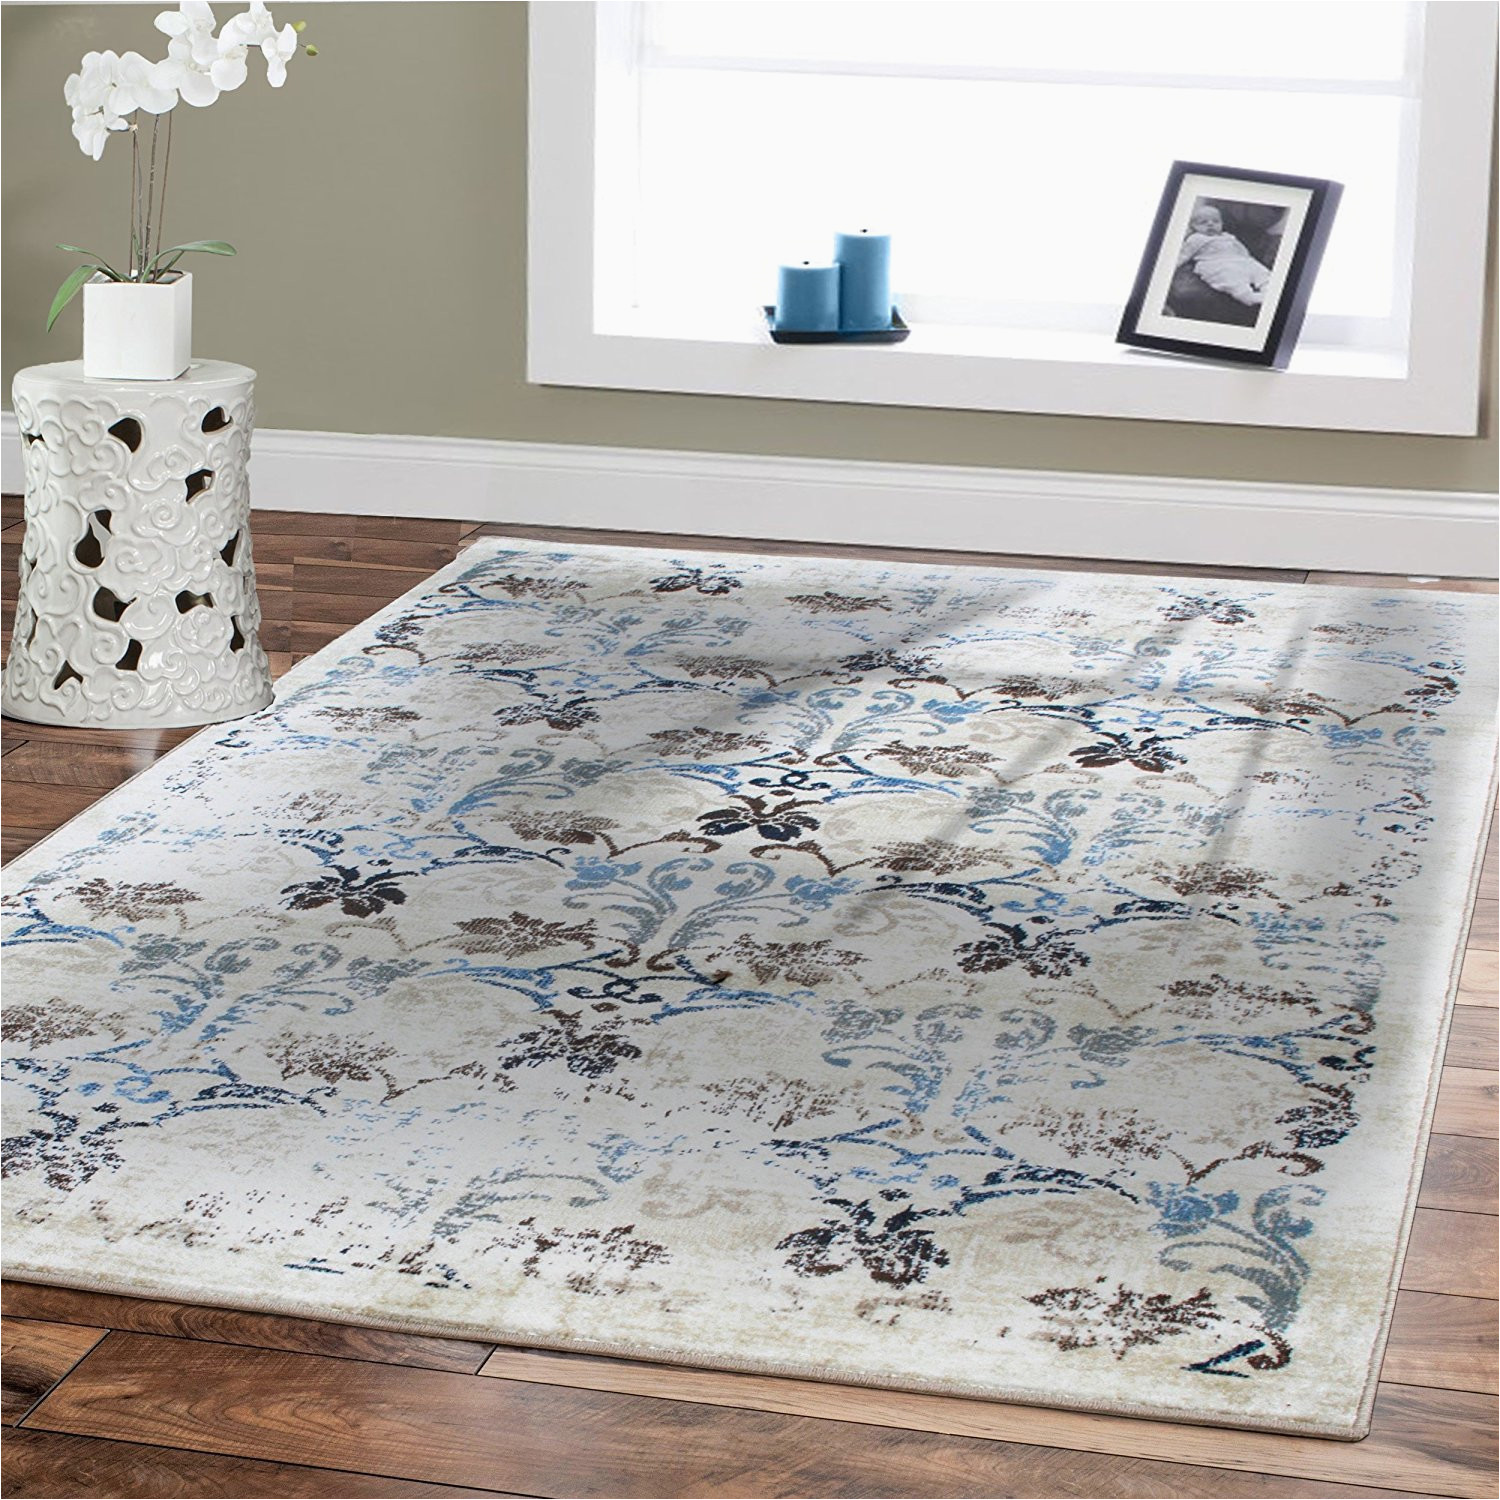 8×10 area Rugs Under 200 Premium Rugs Dining Room Rug for Under the Table 8 by 10 Floor Rugs Clearance Cream 8×11 Distressed Rugs 8×10 area Rugs On Clearance